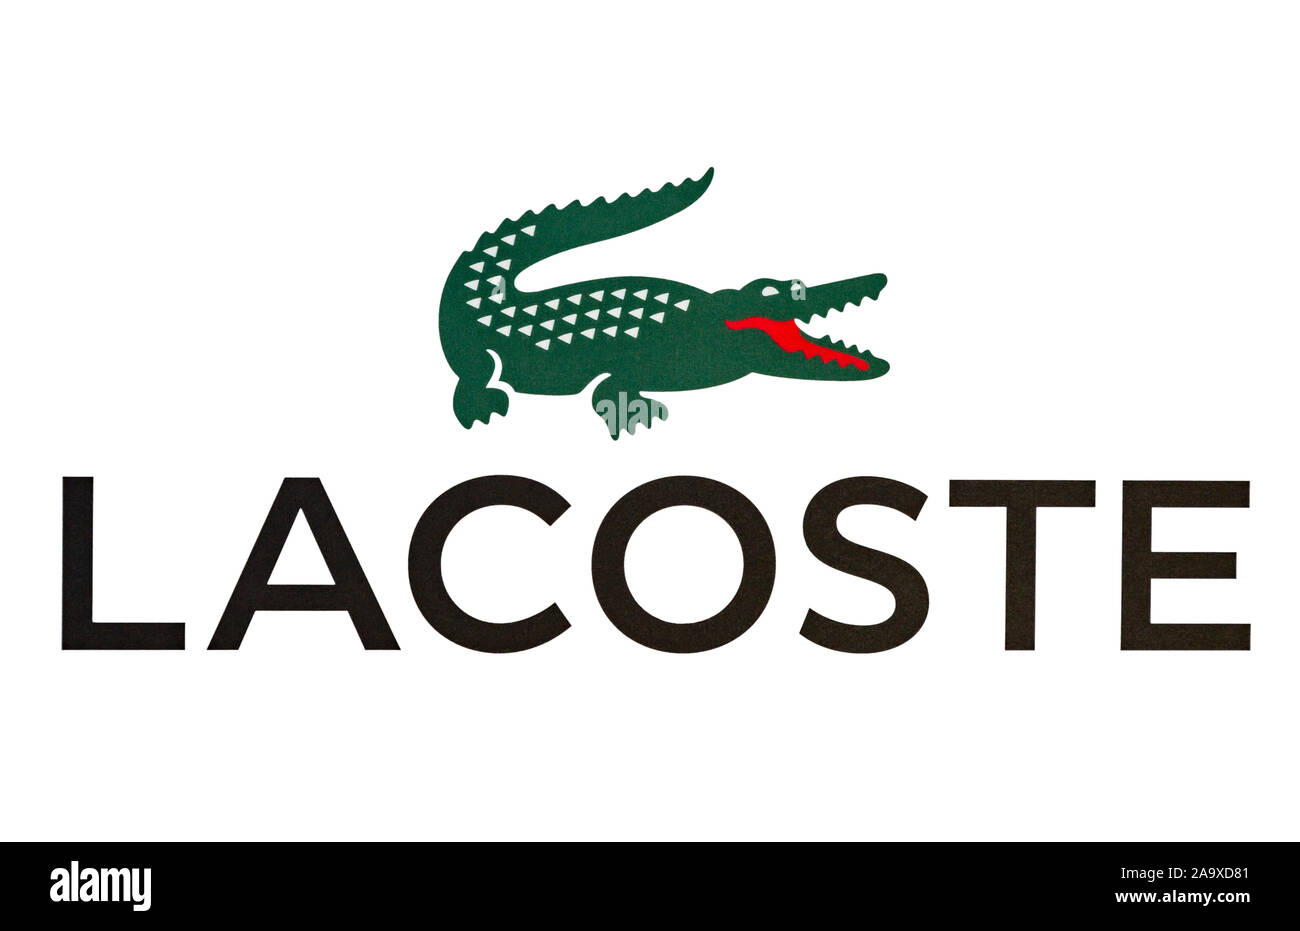 Paris - August 21, 2019: Lacoste logo is seen on a white background in Paris. Stock Photo